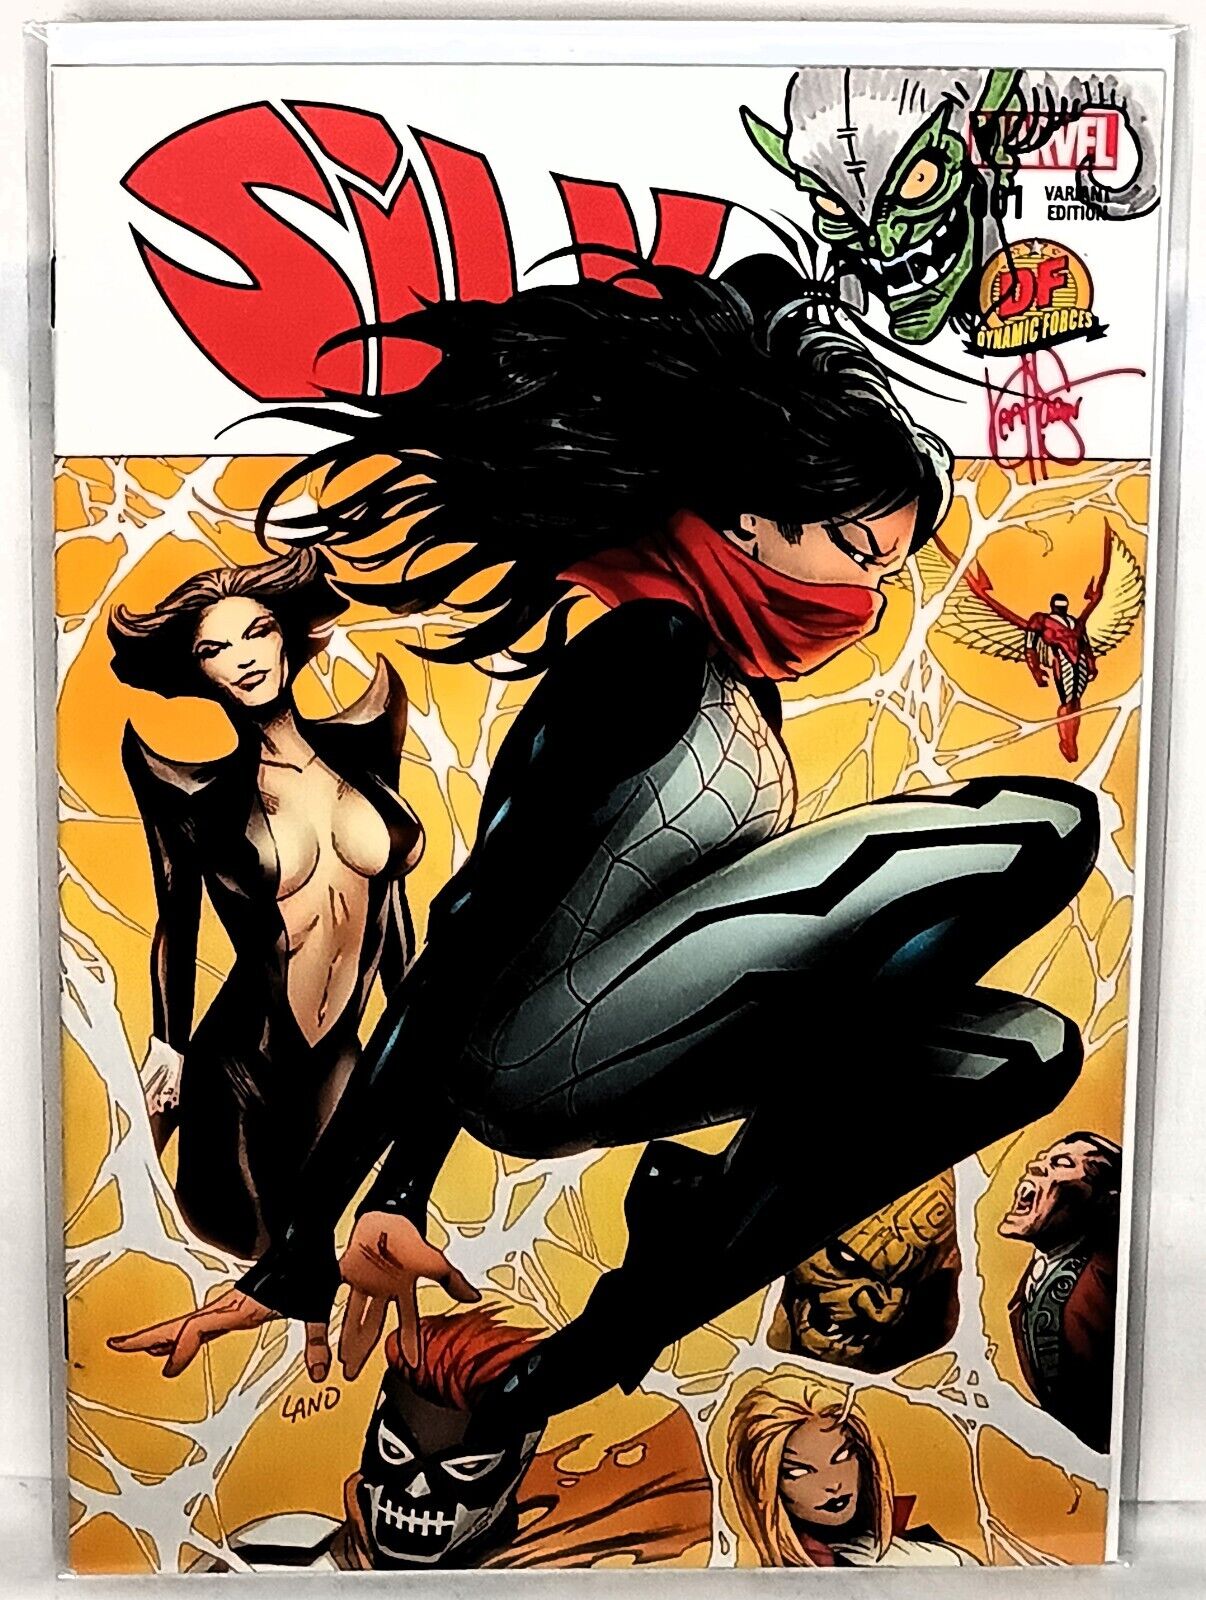 SILK #1 Greg Land Dynamic Forces Exclusive Cover Signed Remarked Ken Haeser